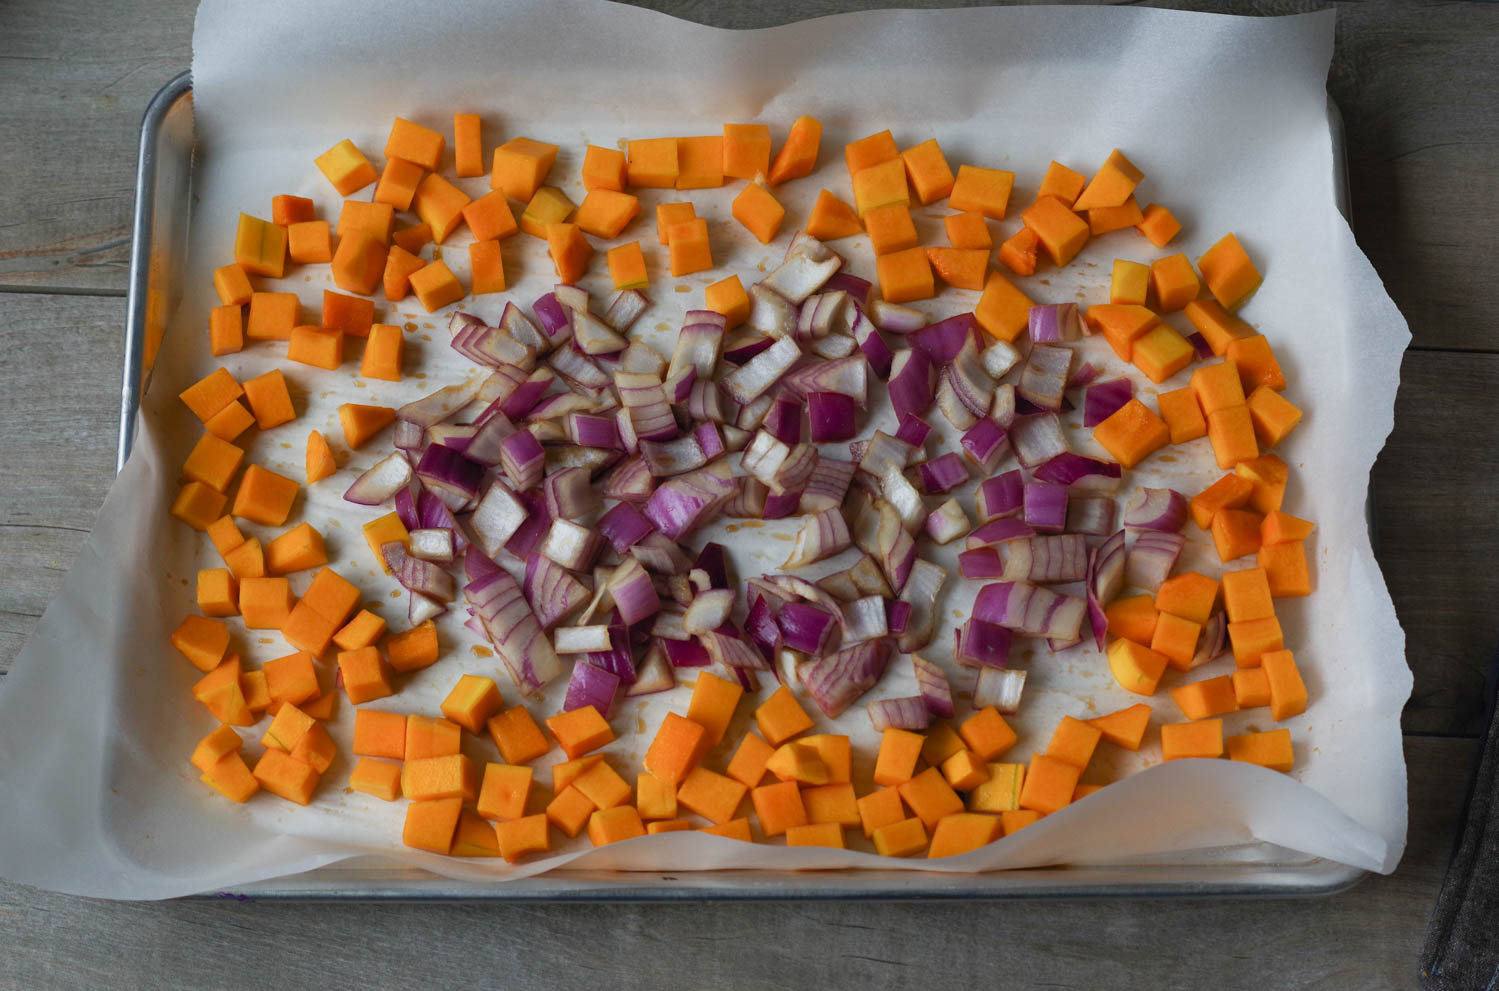 Butternut squash and red onion ready for roasting.